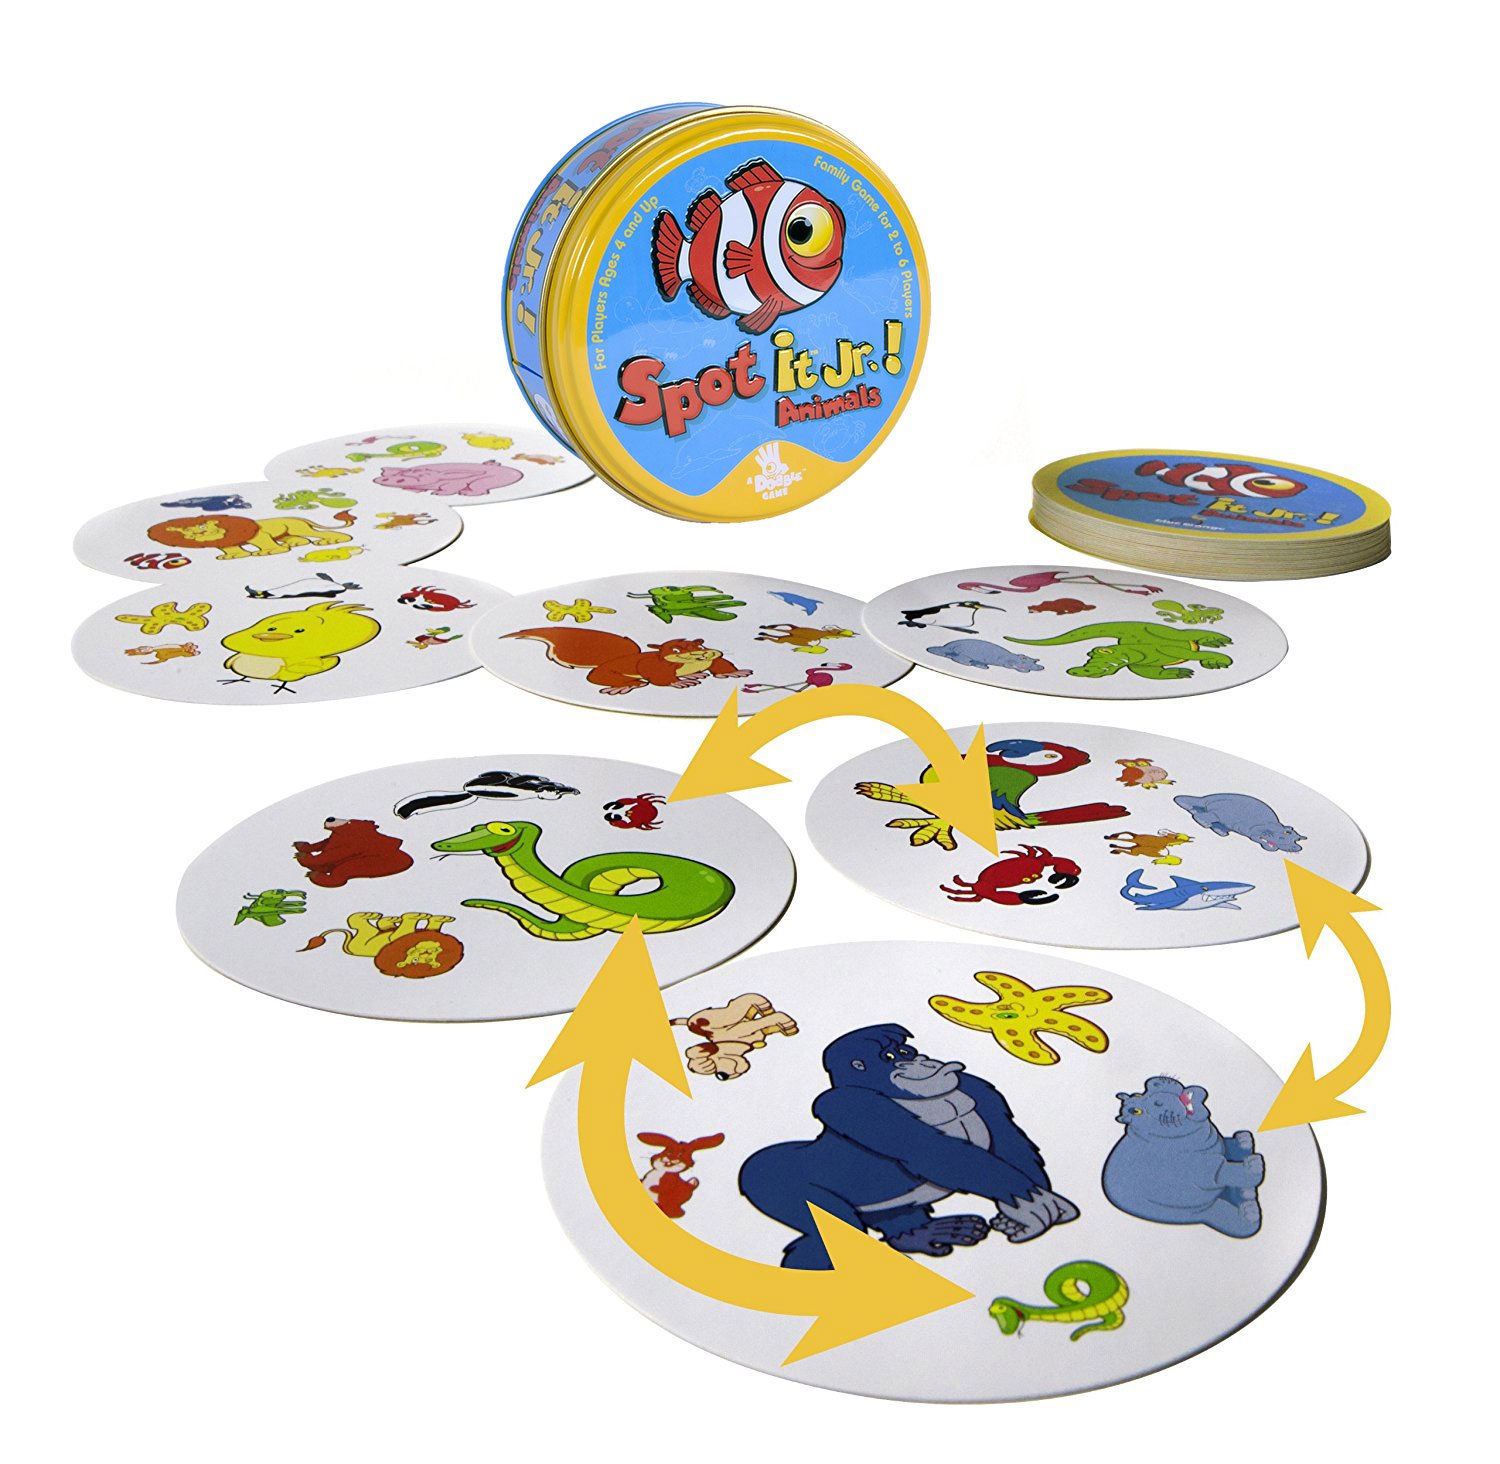 AMIGO Games AMI18002 CLACK! Kids Magnetic Stacking Game, Multicolor & Spot It! Junior Animals Card Game